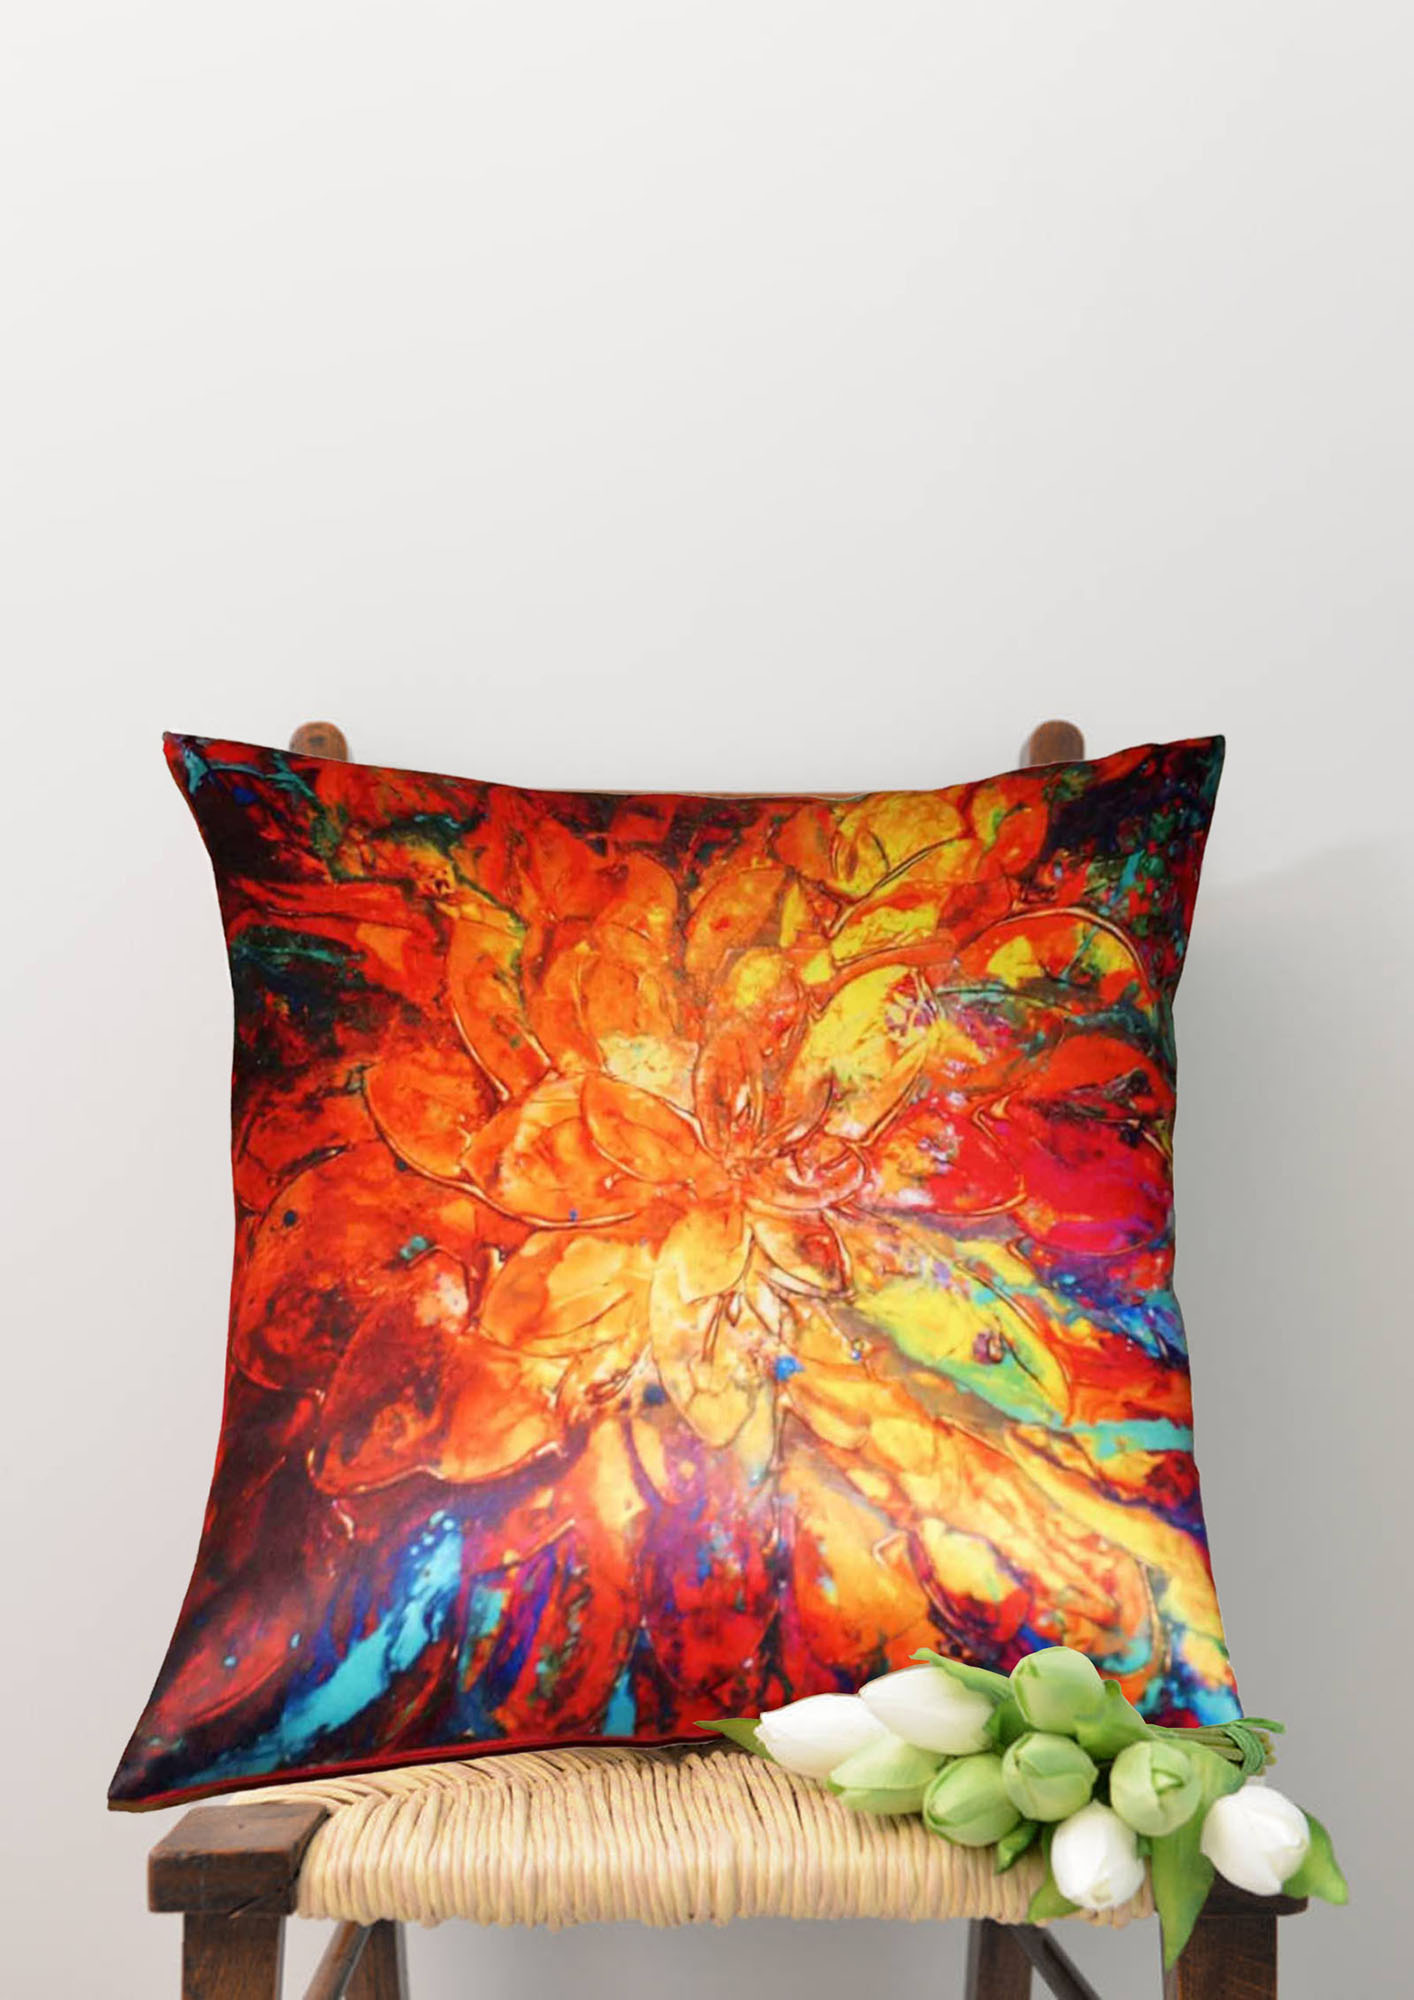 Lushomes Printed Pallate Cushion Cover (16 x 16 inches, Single pc)